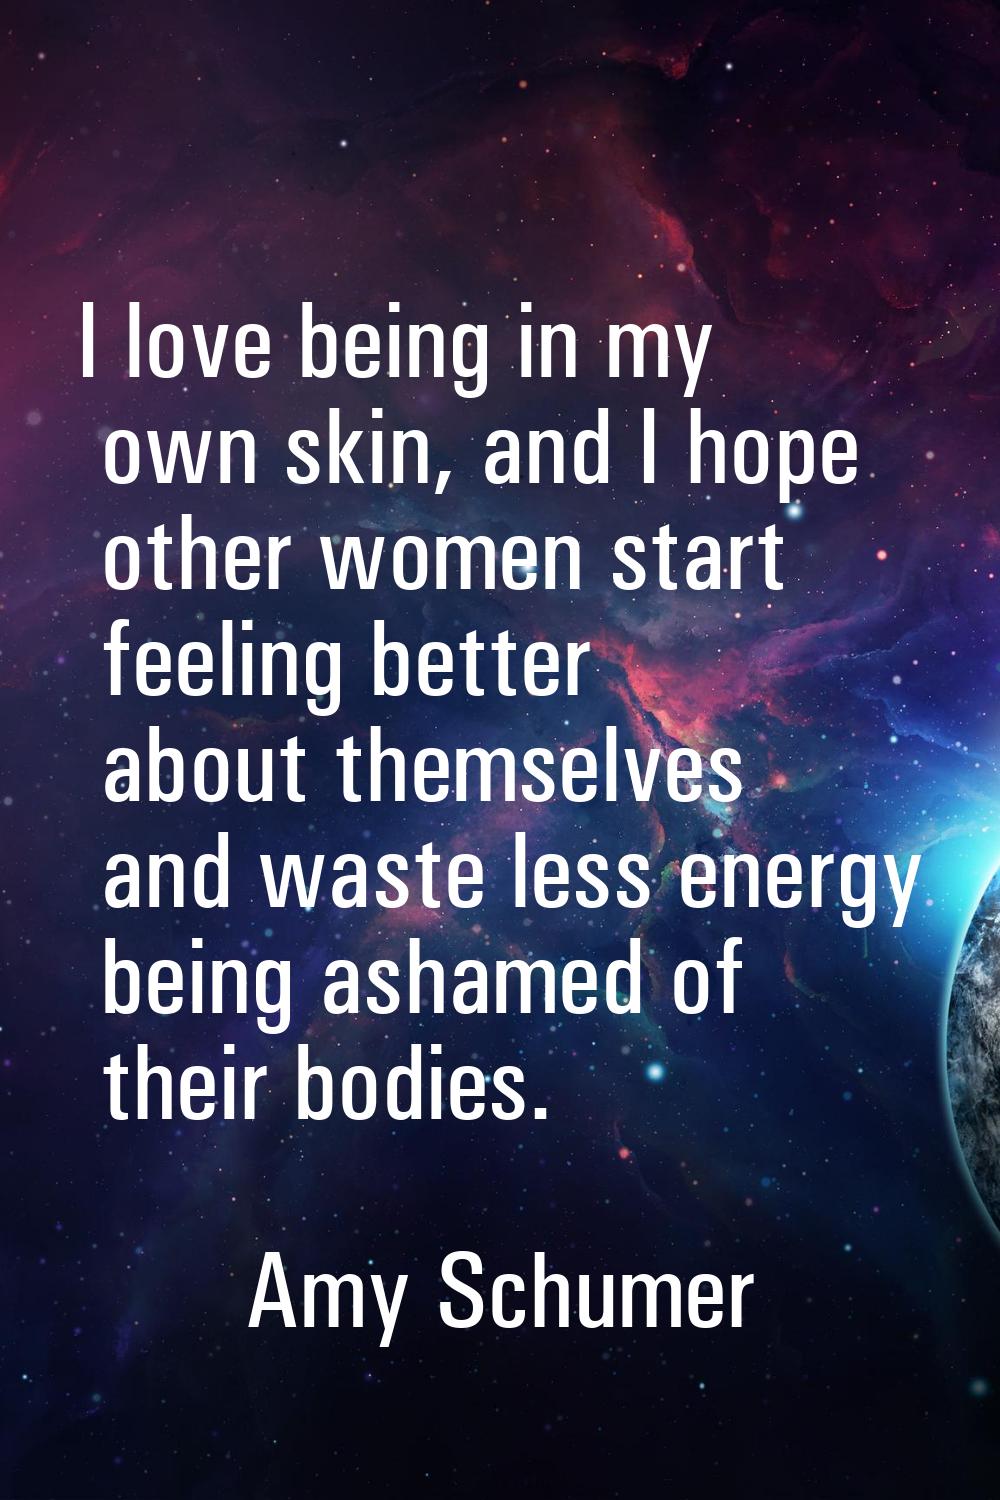 I love being in my own skin, and I hope other women start feeling better about themselves and waste